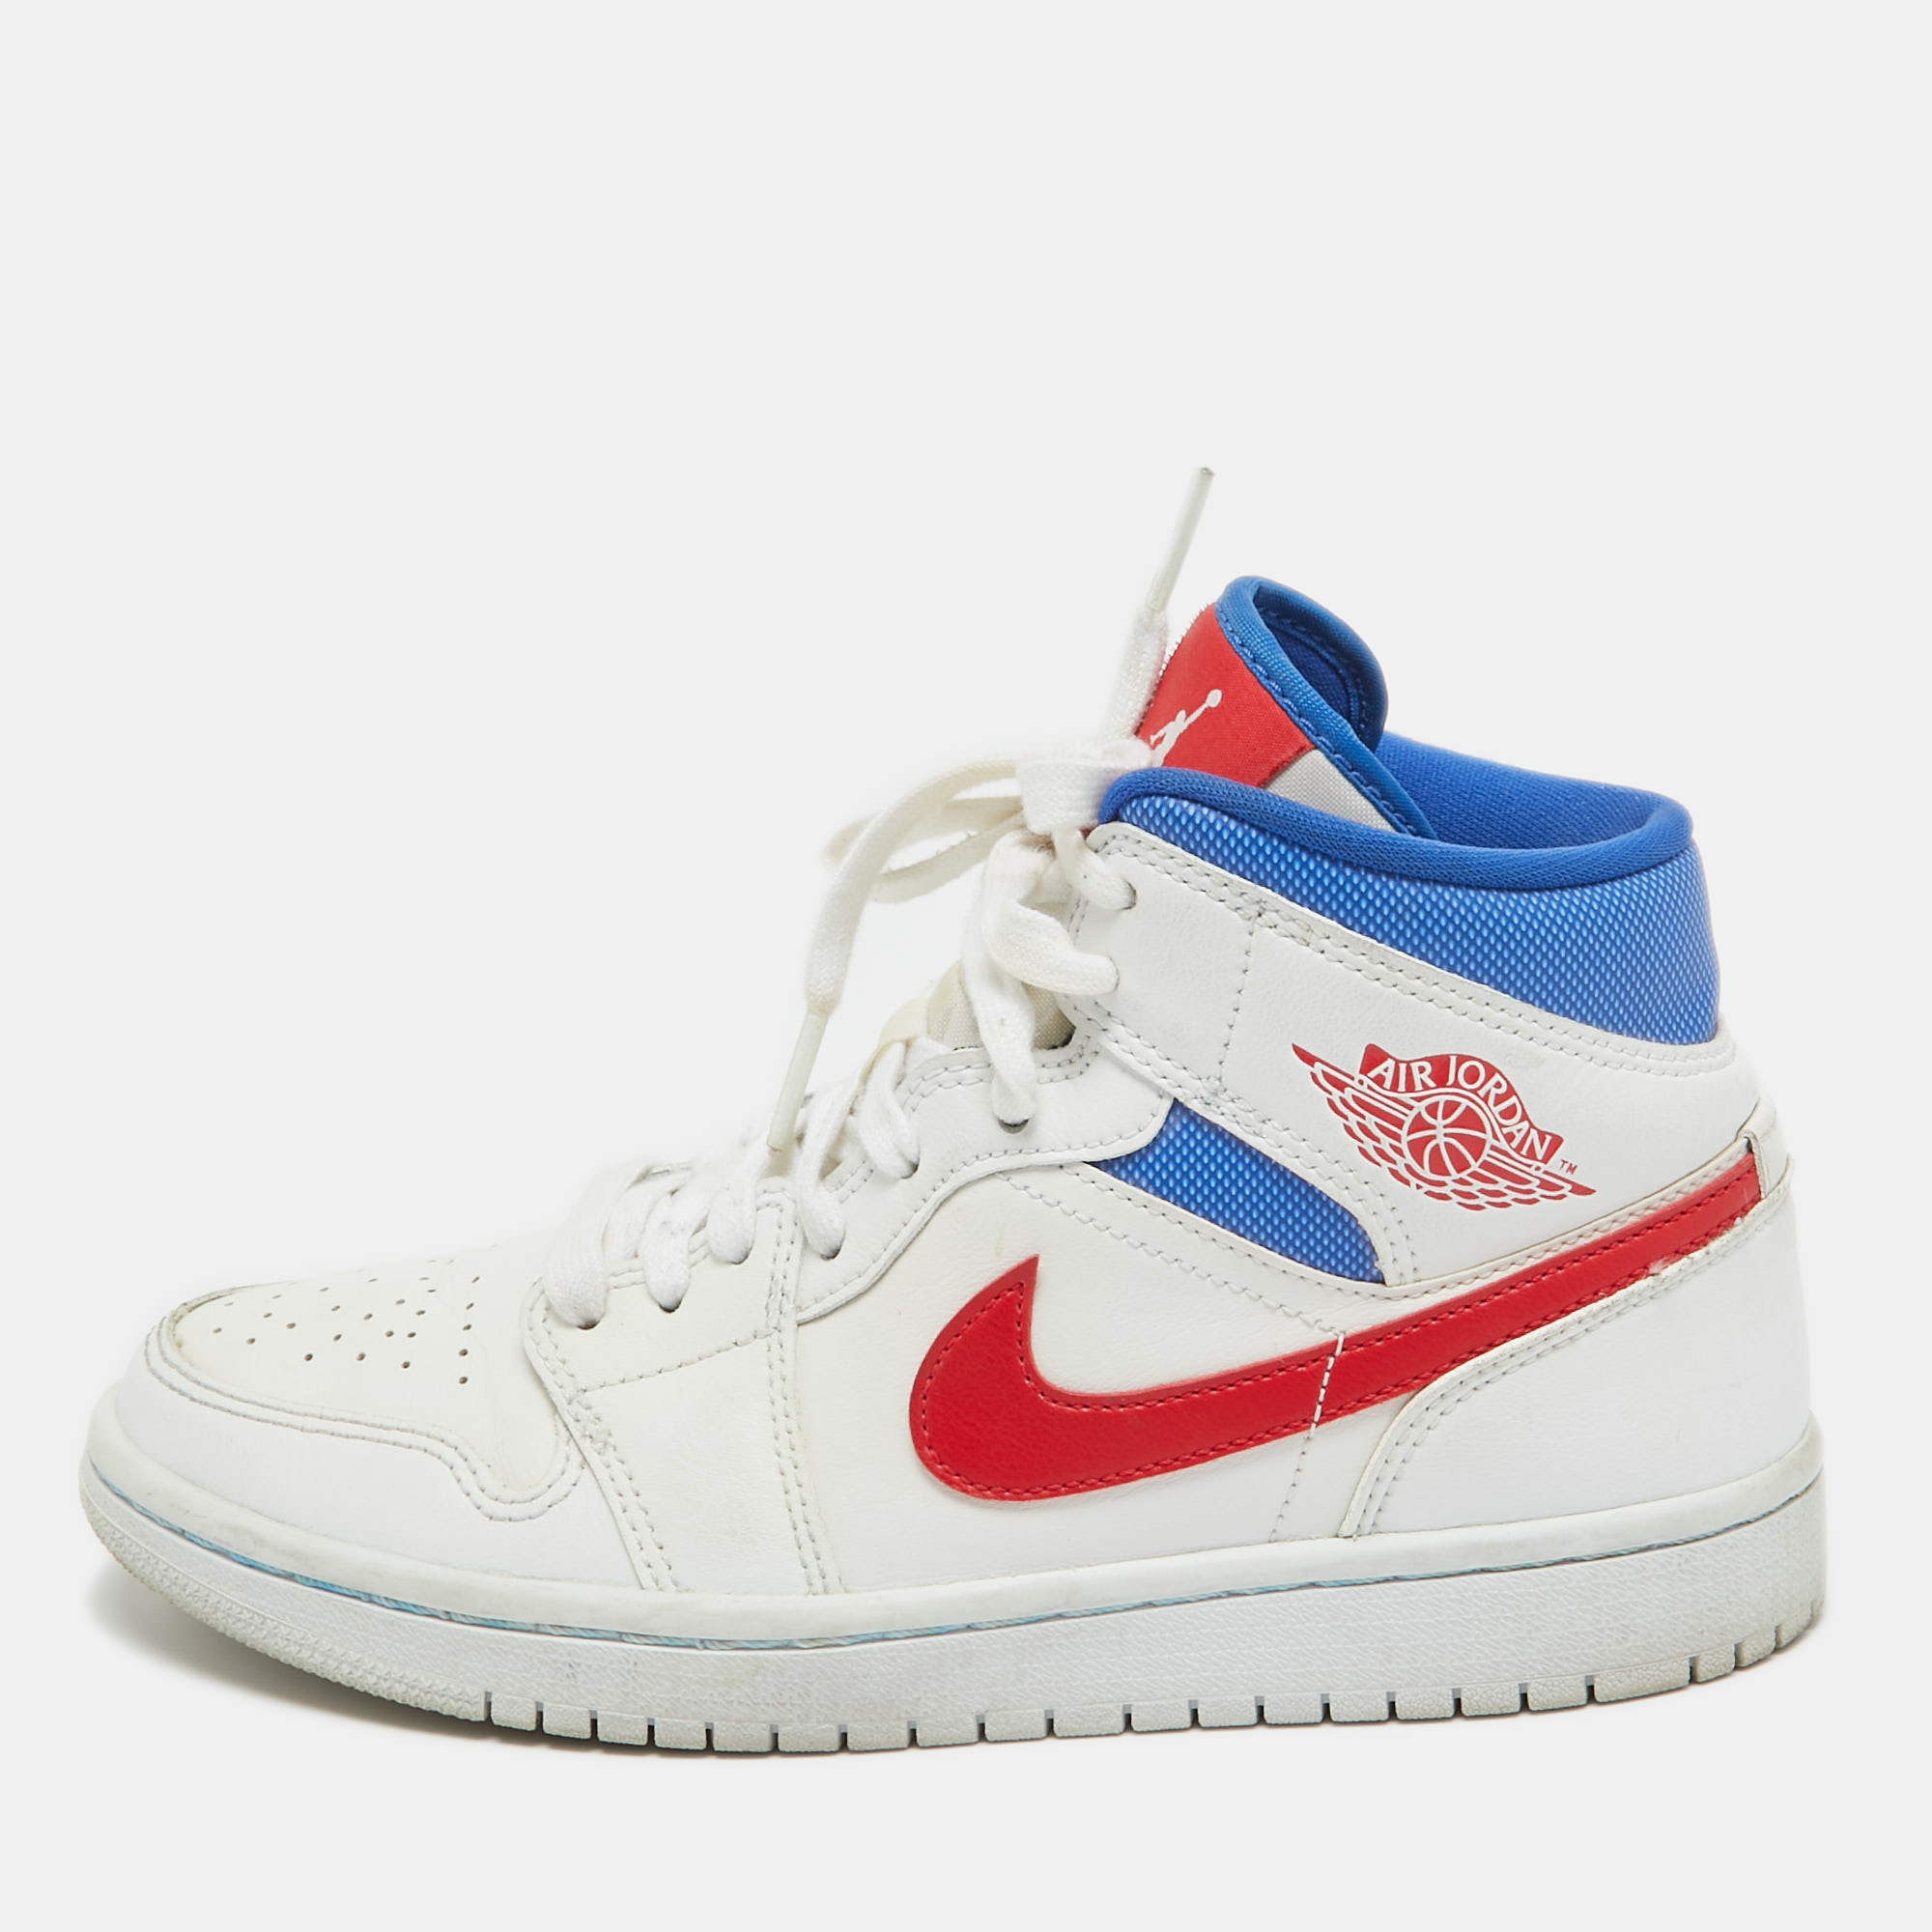 Pre-owned Air Jordans Tricolor Leather Air Jordan 1 Mid White Blue Red Sneakers Size 37.5